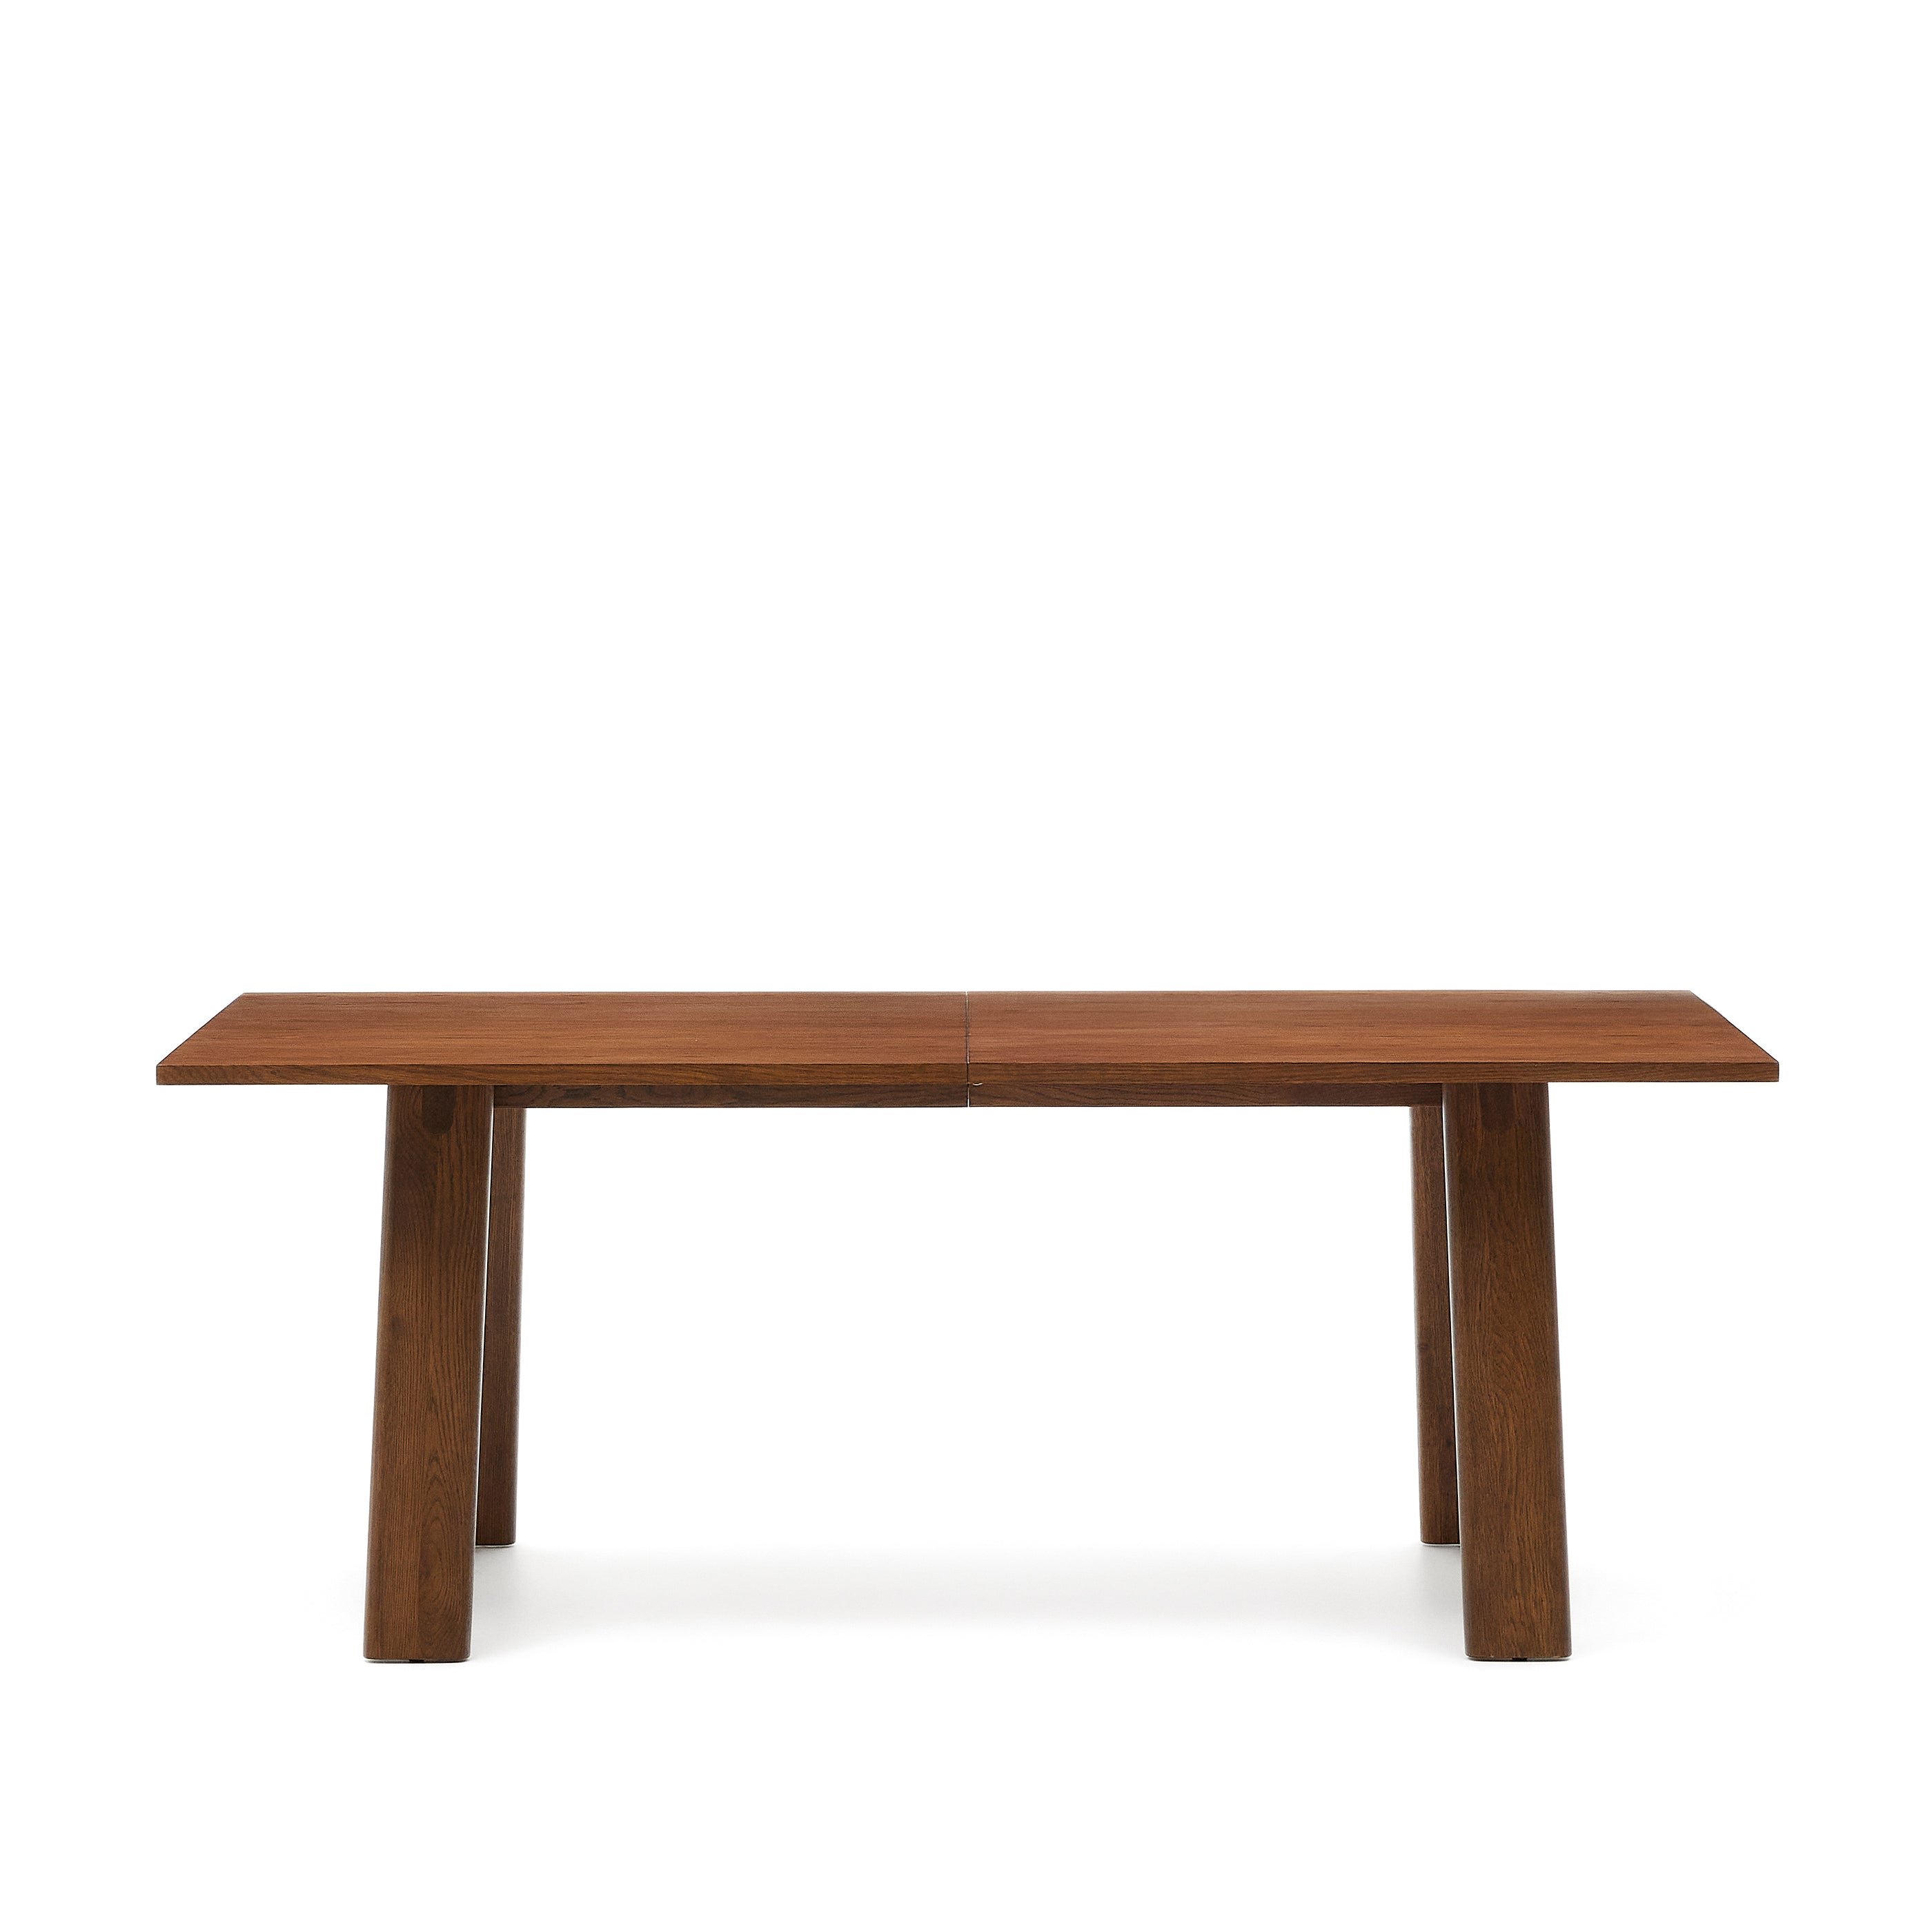 Arlen extendable table in solid oak and veneer with walnut finish 200(250) 95 cm FSC Mix Credit